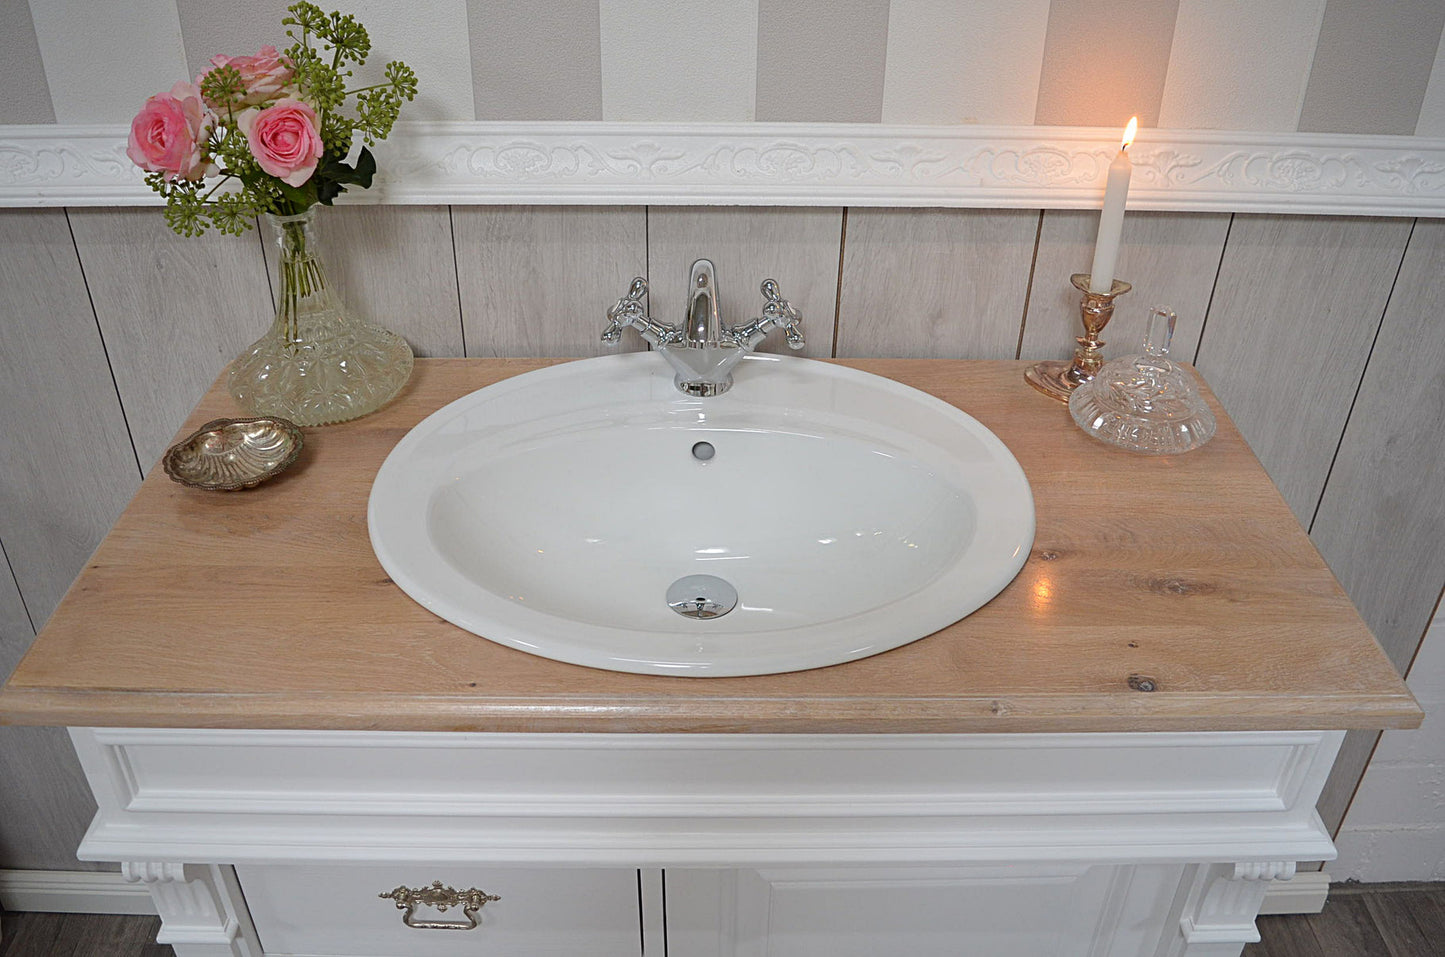 "Mersey" Solid country house vanity unit with light oak top